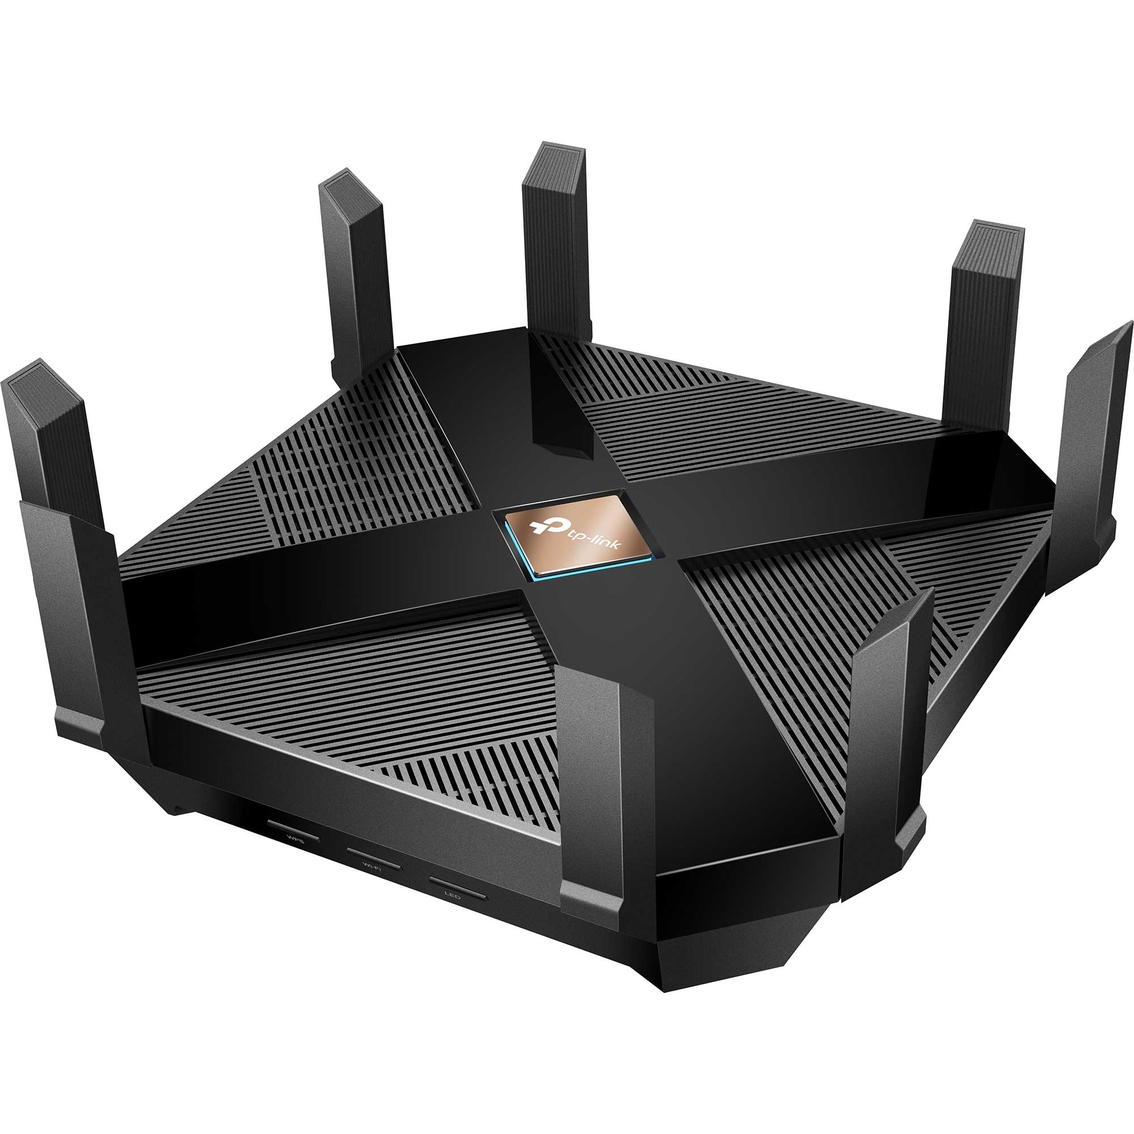 TP-Link AX6000 Next-Gen WiFi Router - Image 2 of 2